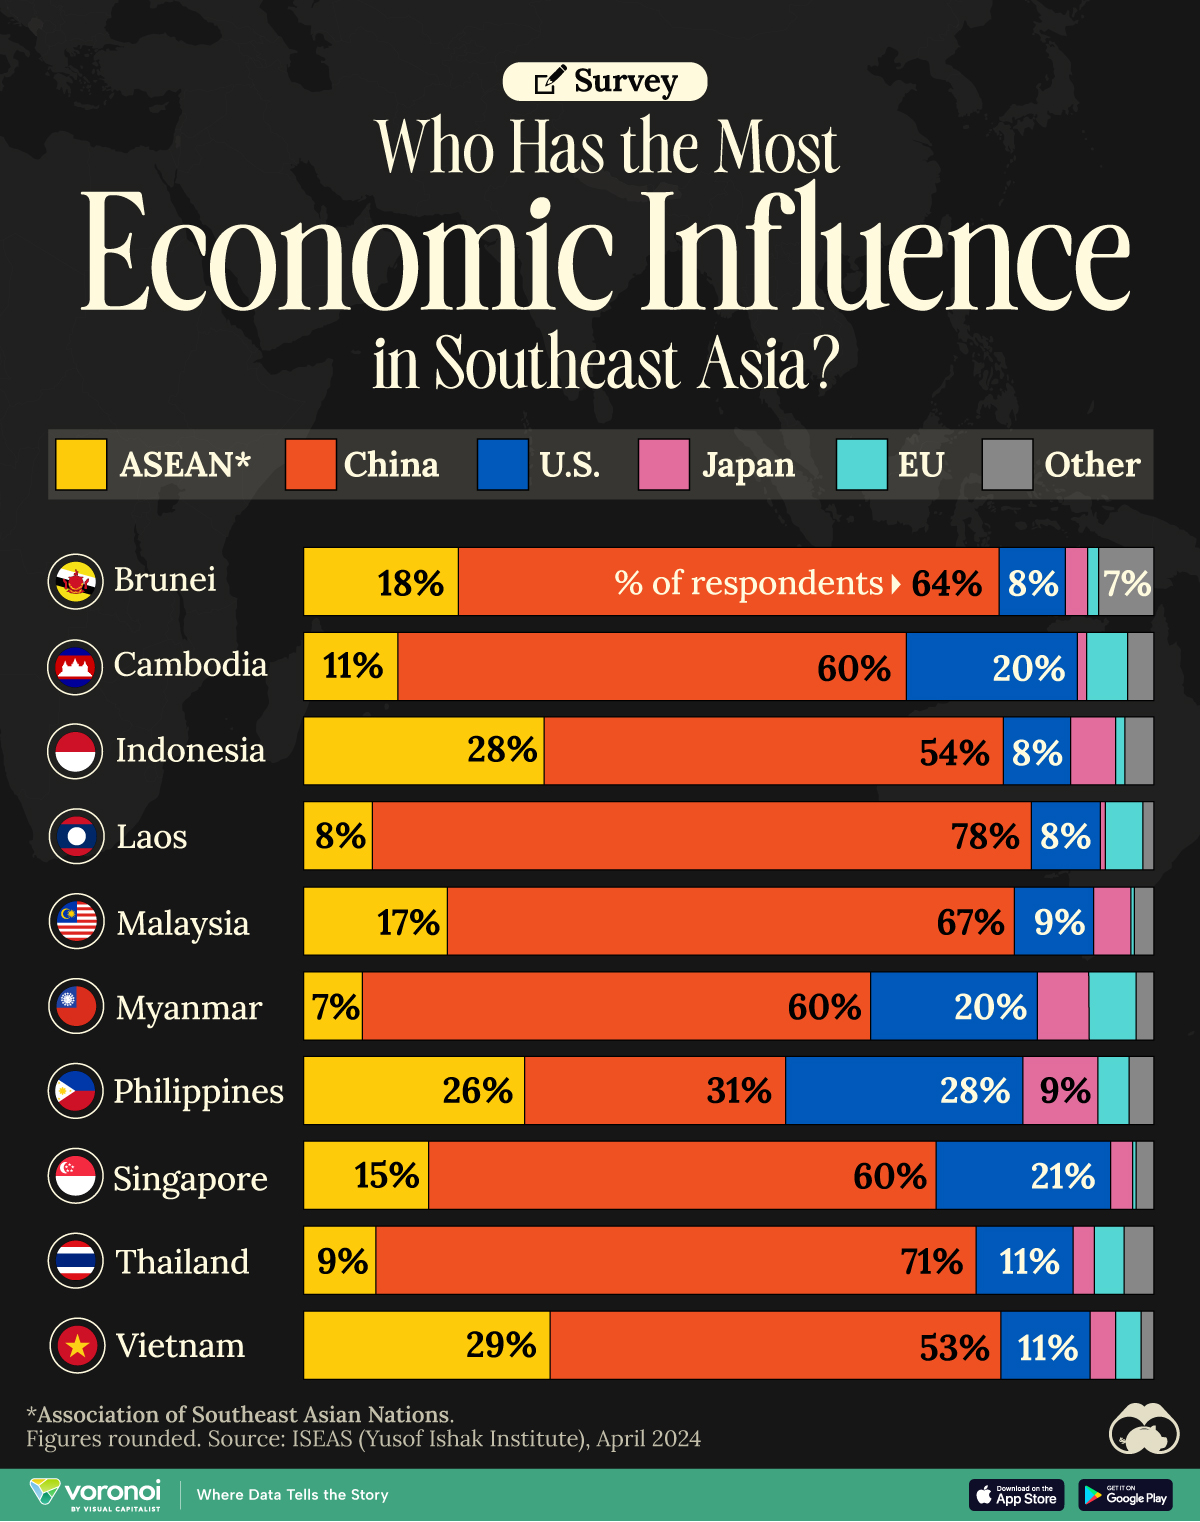 A bar chart depicting the countries/ regions identified by respondents as having the greatest economic influence in Southeast Asia.